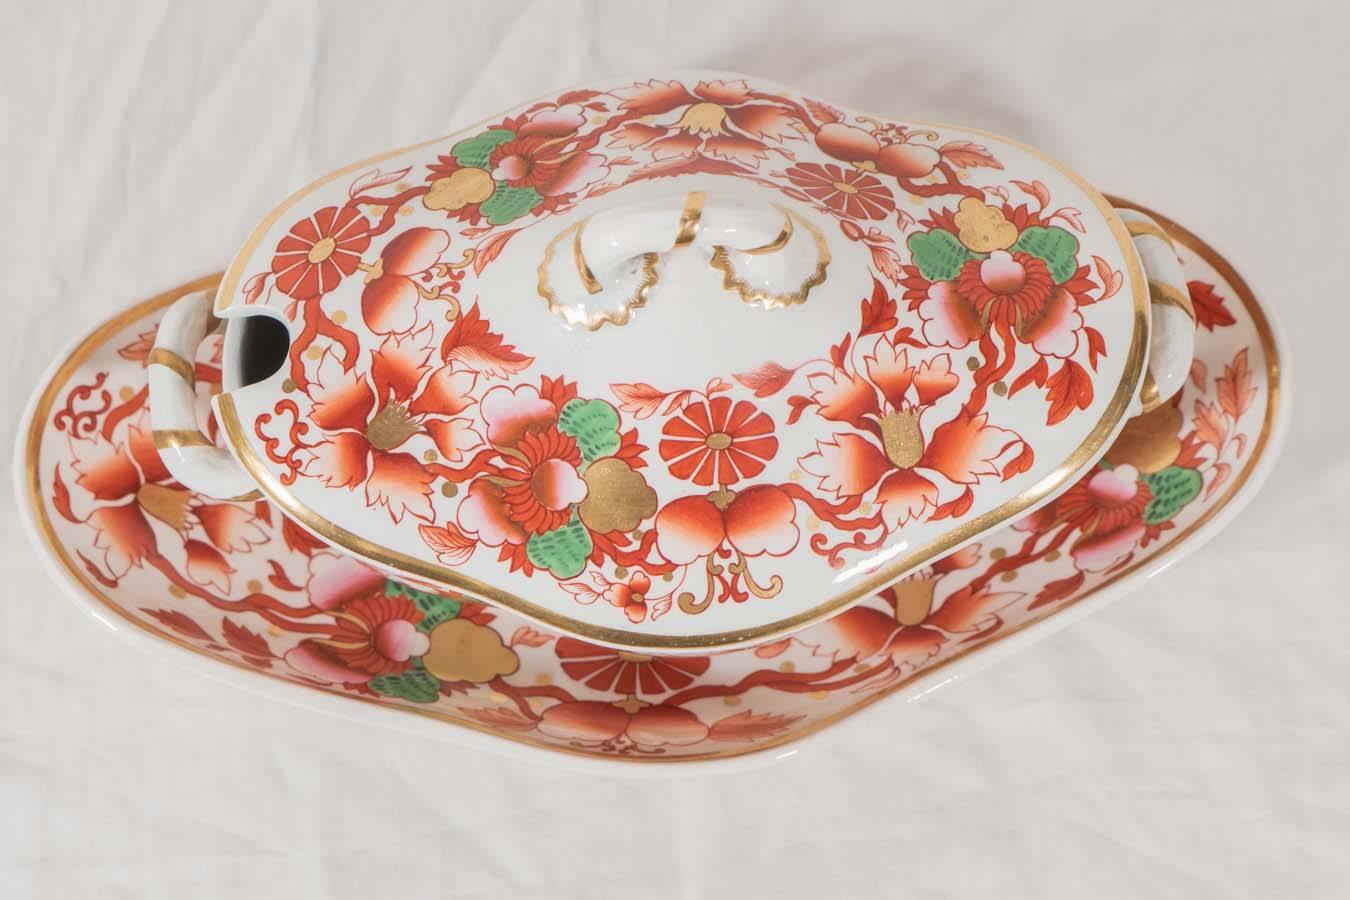 English Pair Antique Spode Tureens Painted in Orange Pink and Green